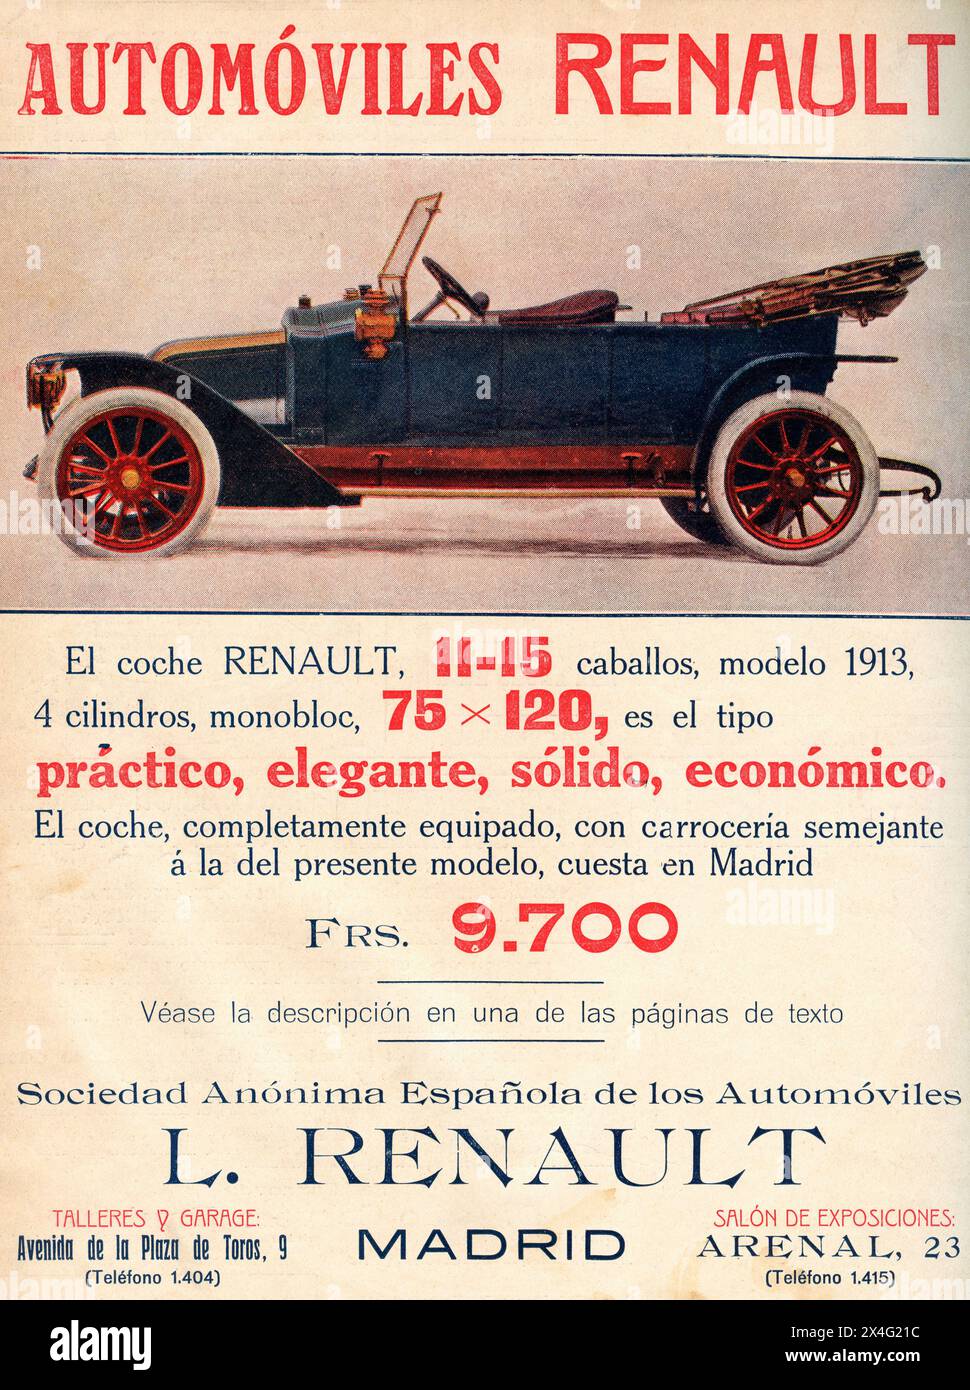 Spanish advertisement for a Renault motor car.  From Mundo Grafico, published 1912. Stock Photo